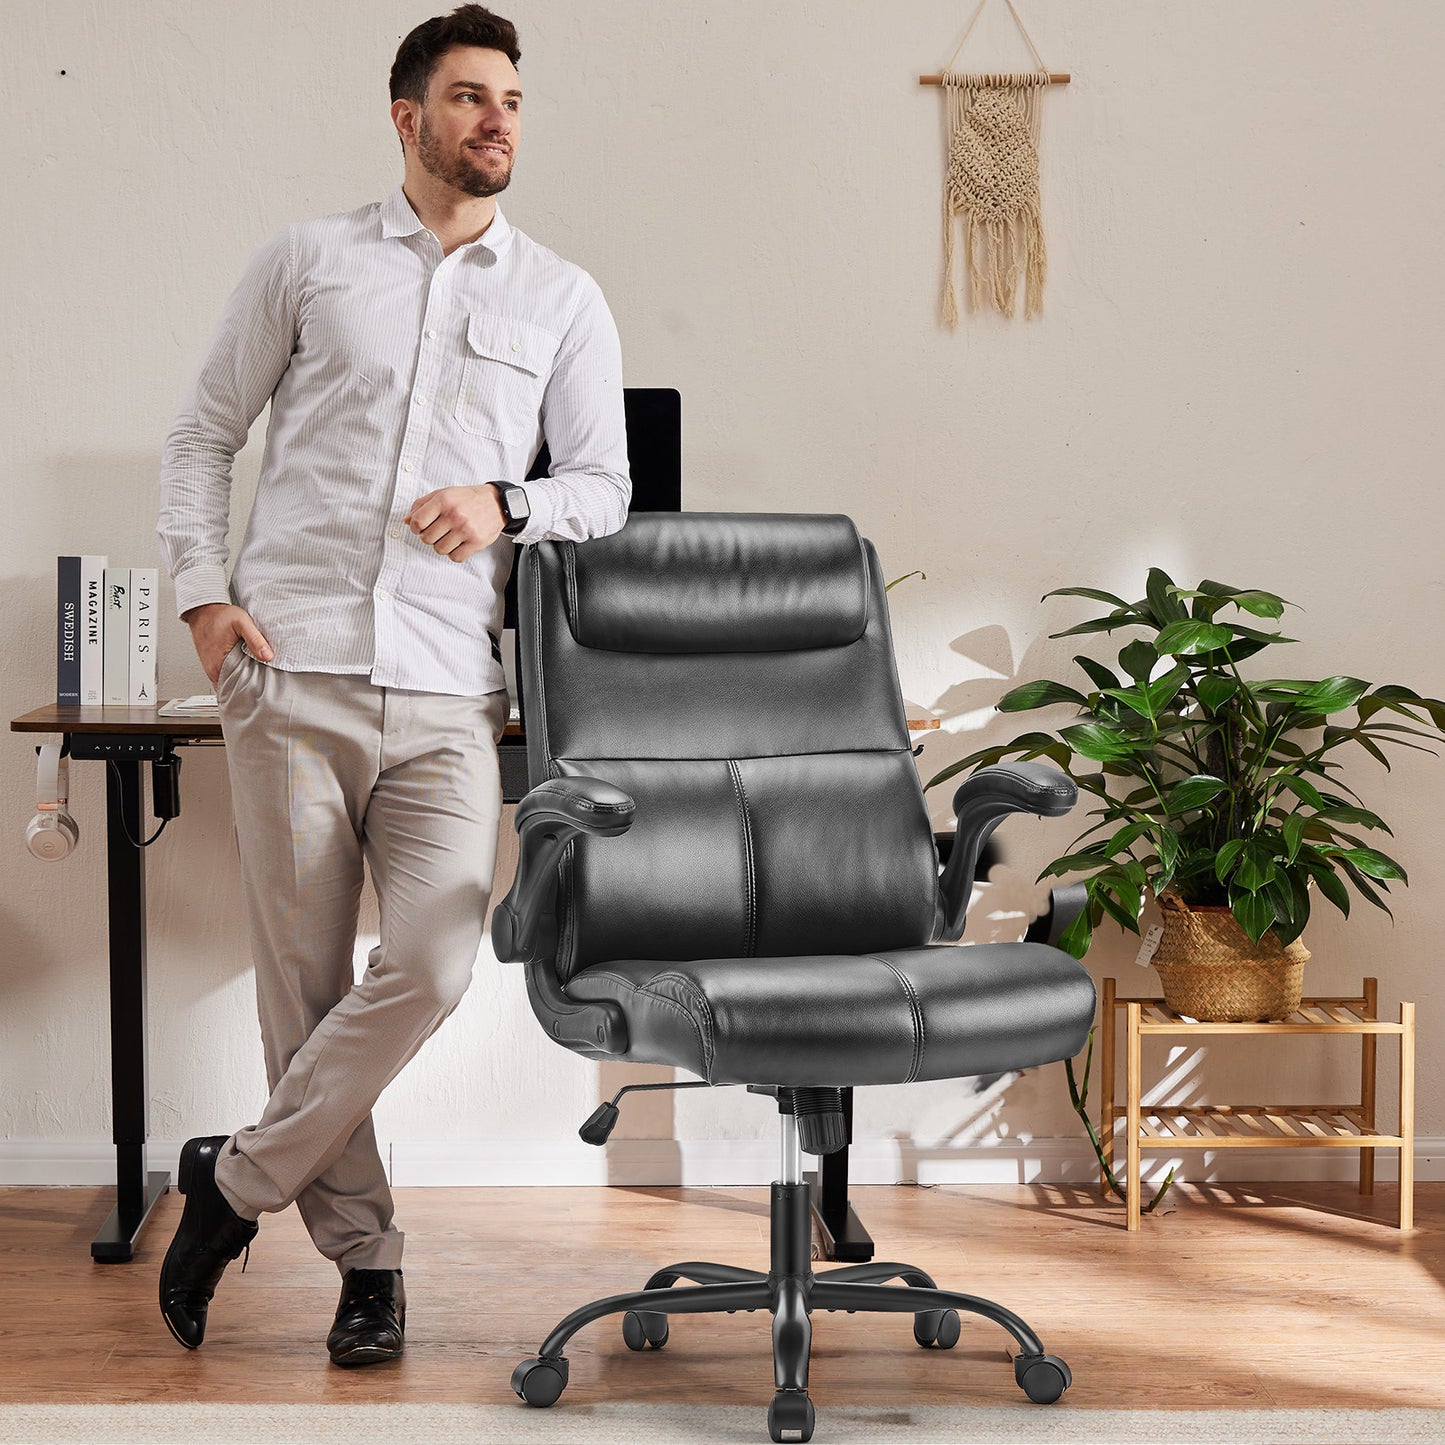 Ergonomic Executive Home Office Chair Adjustable Height PU Leather Desk Chair